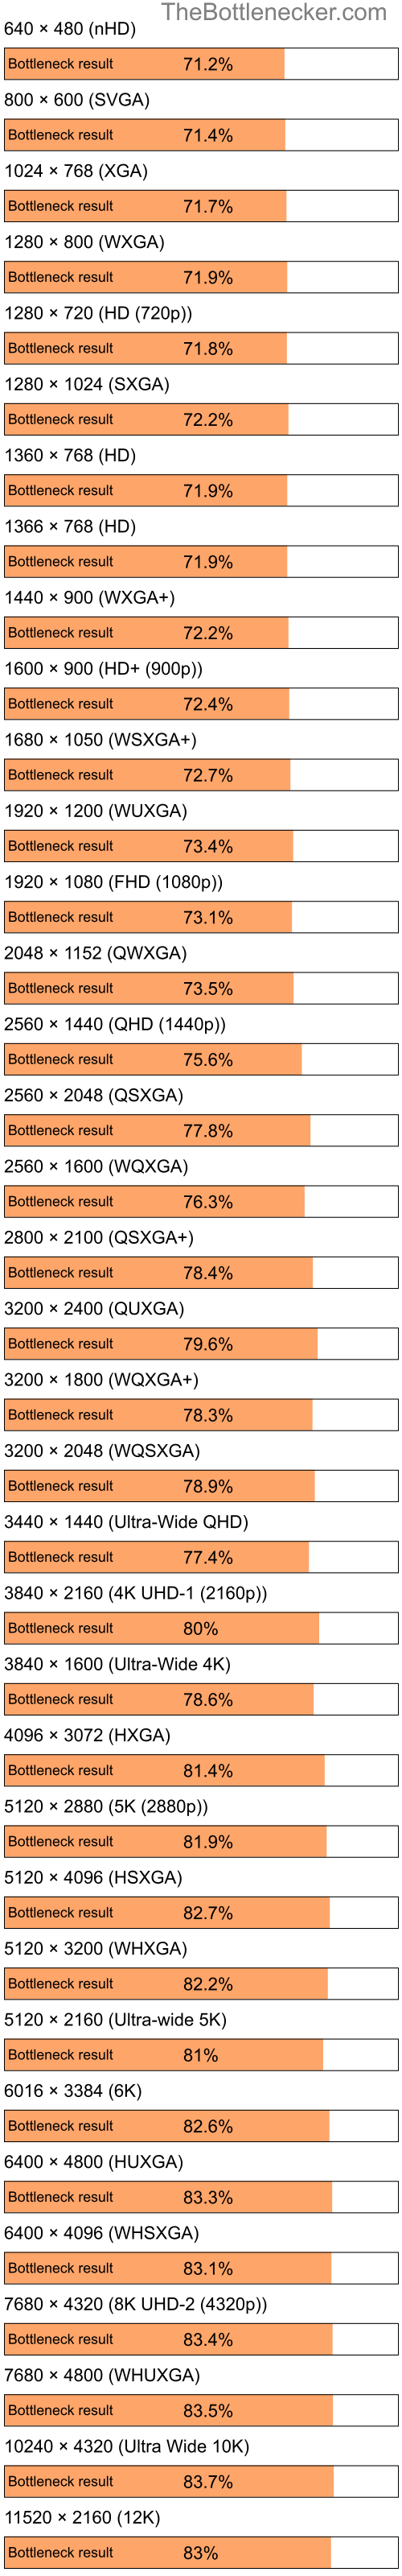 Bottleneck results by resolution for Intel Pentium 4 and AMD Radeon X1300 PRO in Graphic Card Intense Tasks